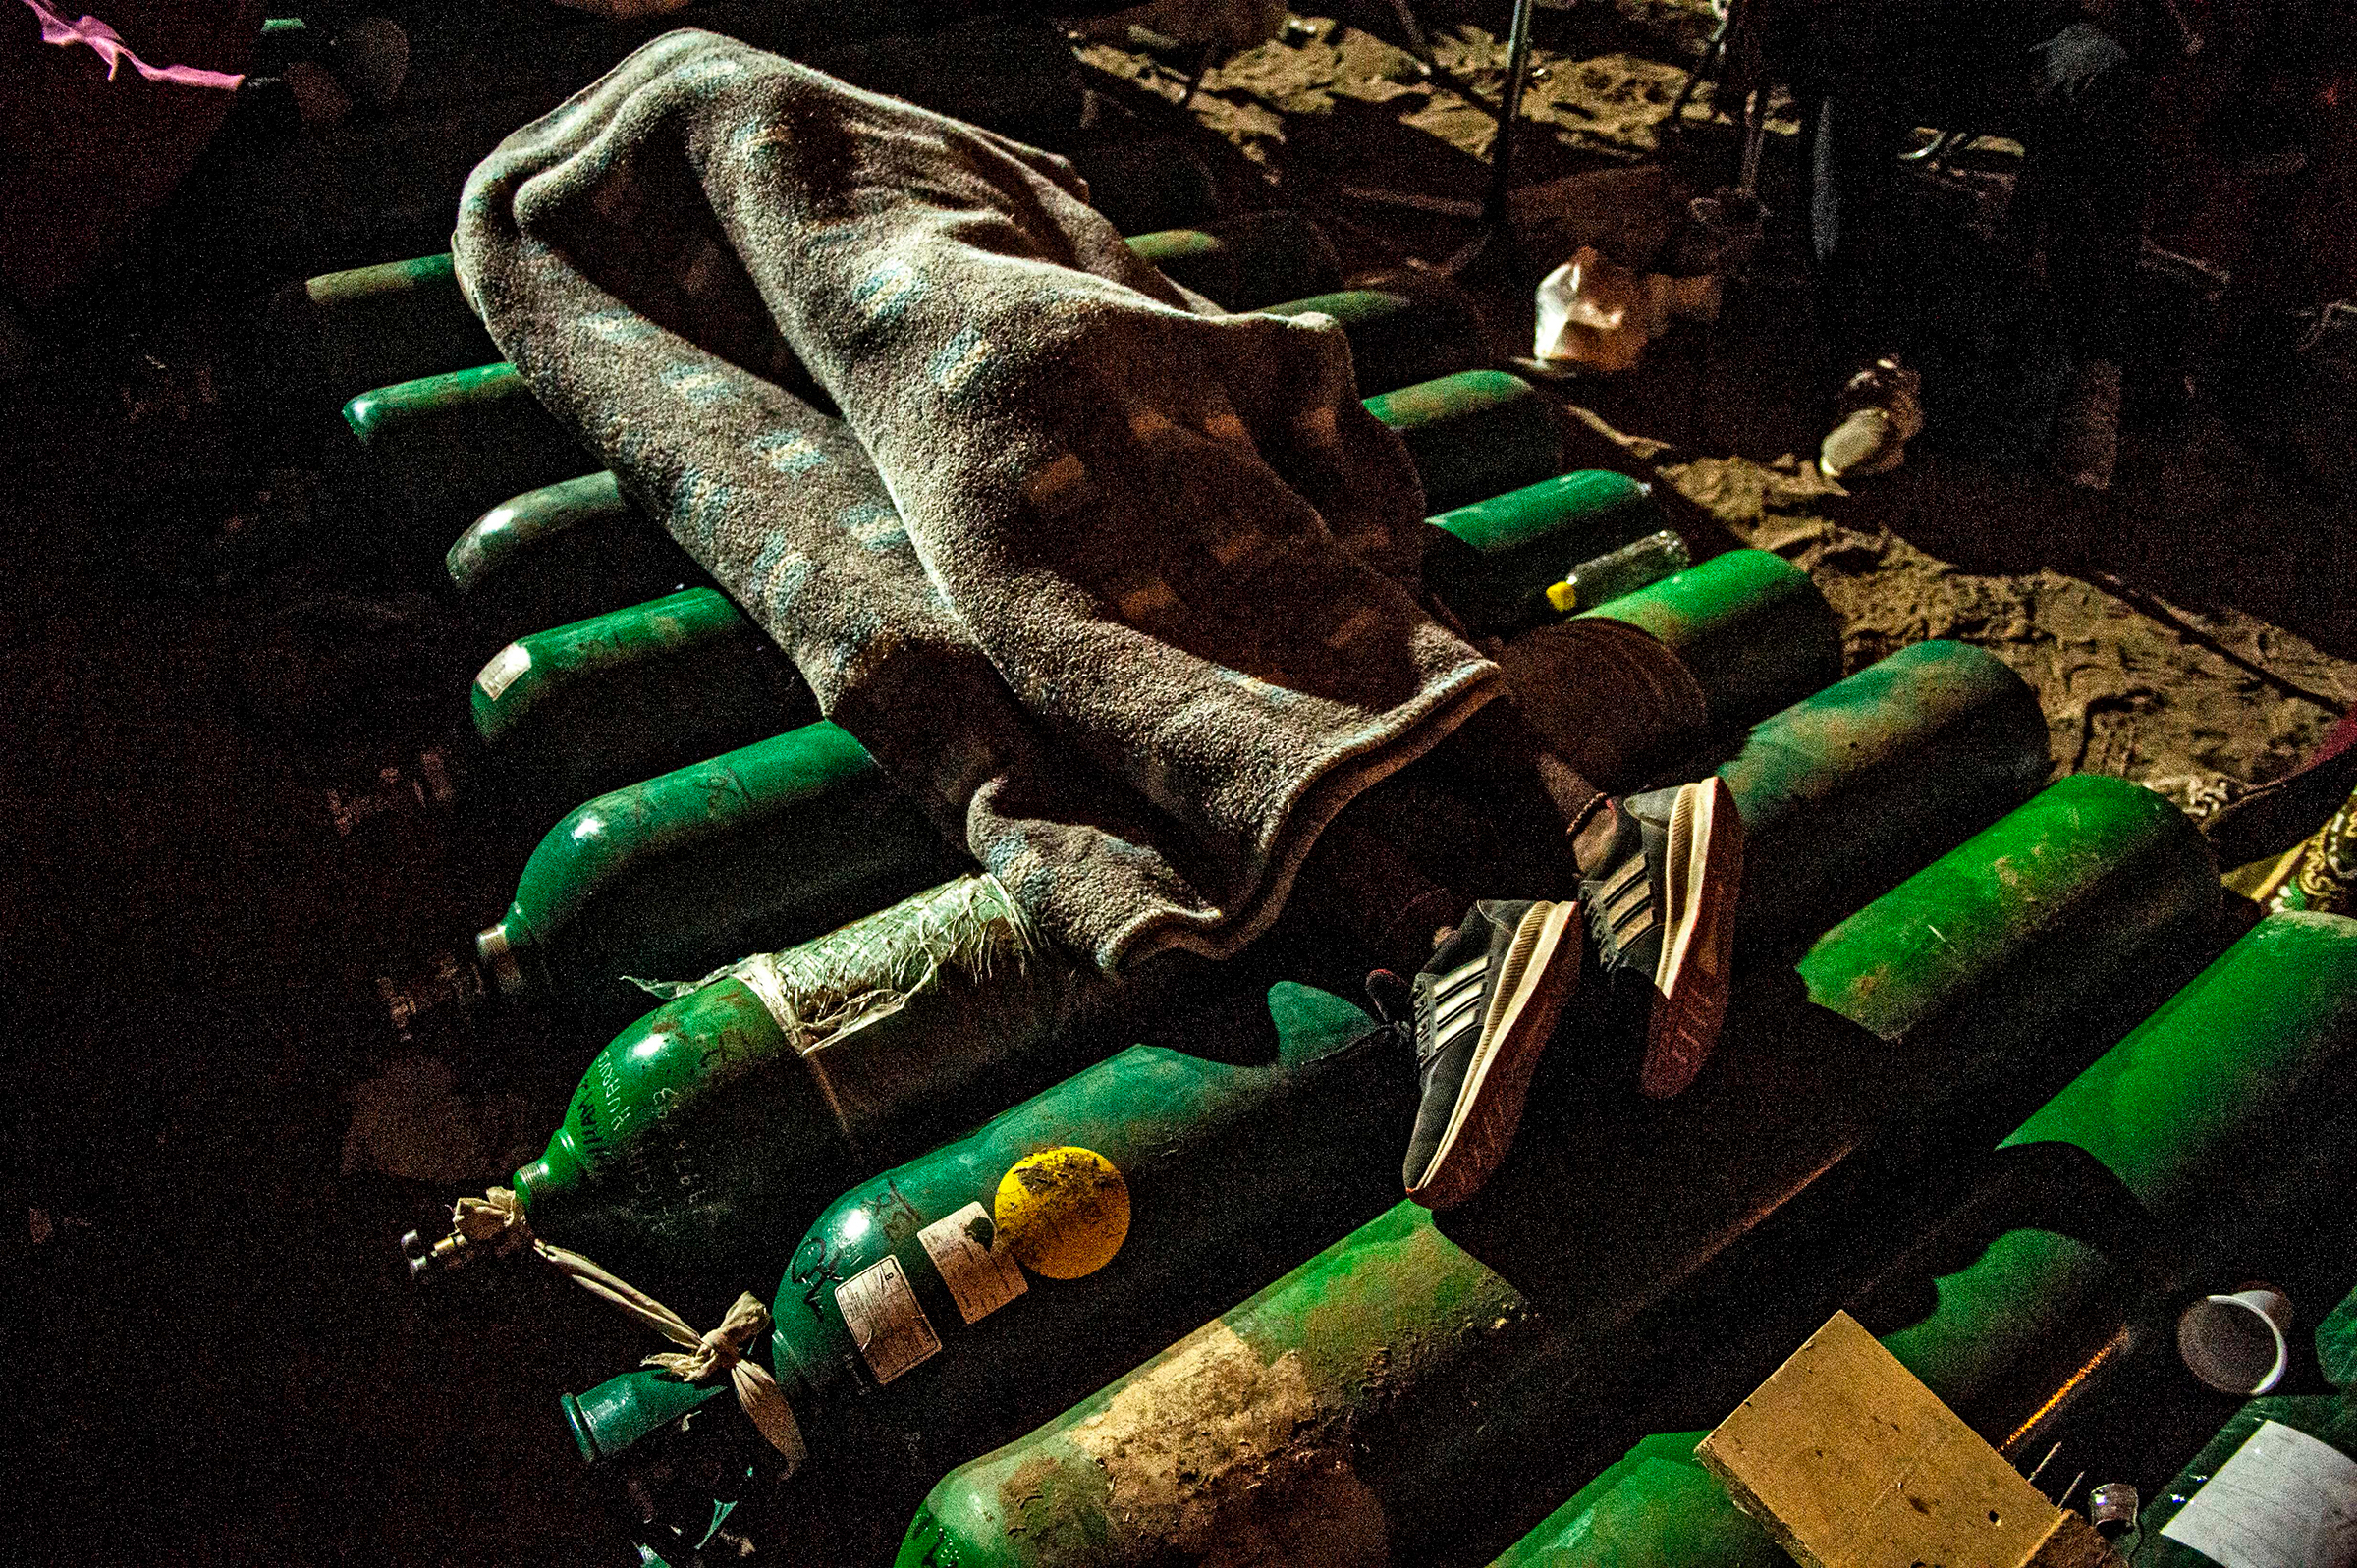 A person sleeps on empty oxygen cylinders while waiting to refill them in Villa El Salvador, on the southern outskirts of Lima, on Feb. 25, 2021. Relatives of COVID-19 patients were desperate for oxygen to keep their loved ones alive during a fierce second wave of the pandemic in Peru.